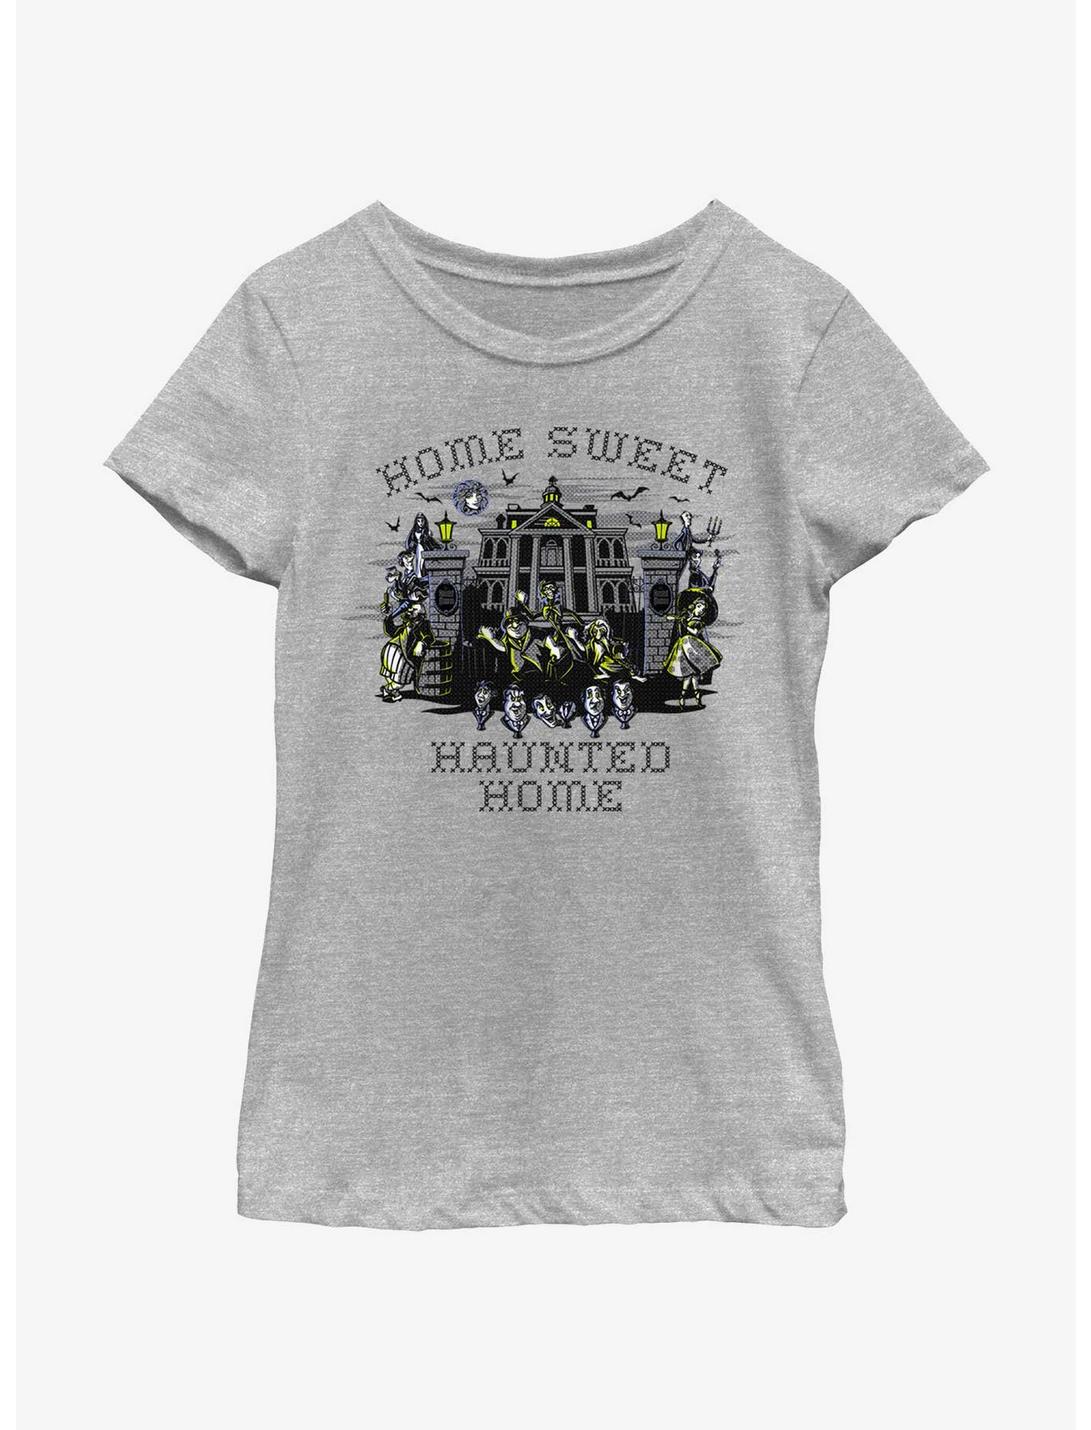 Disney Haunted Mansion Home Sweet Haunted Home Youth Girls T-Shirt, ATH HTR, hi-res